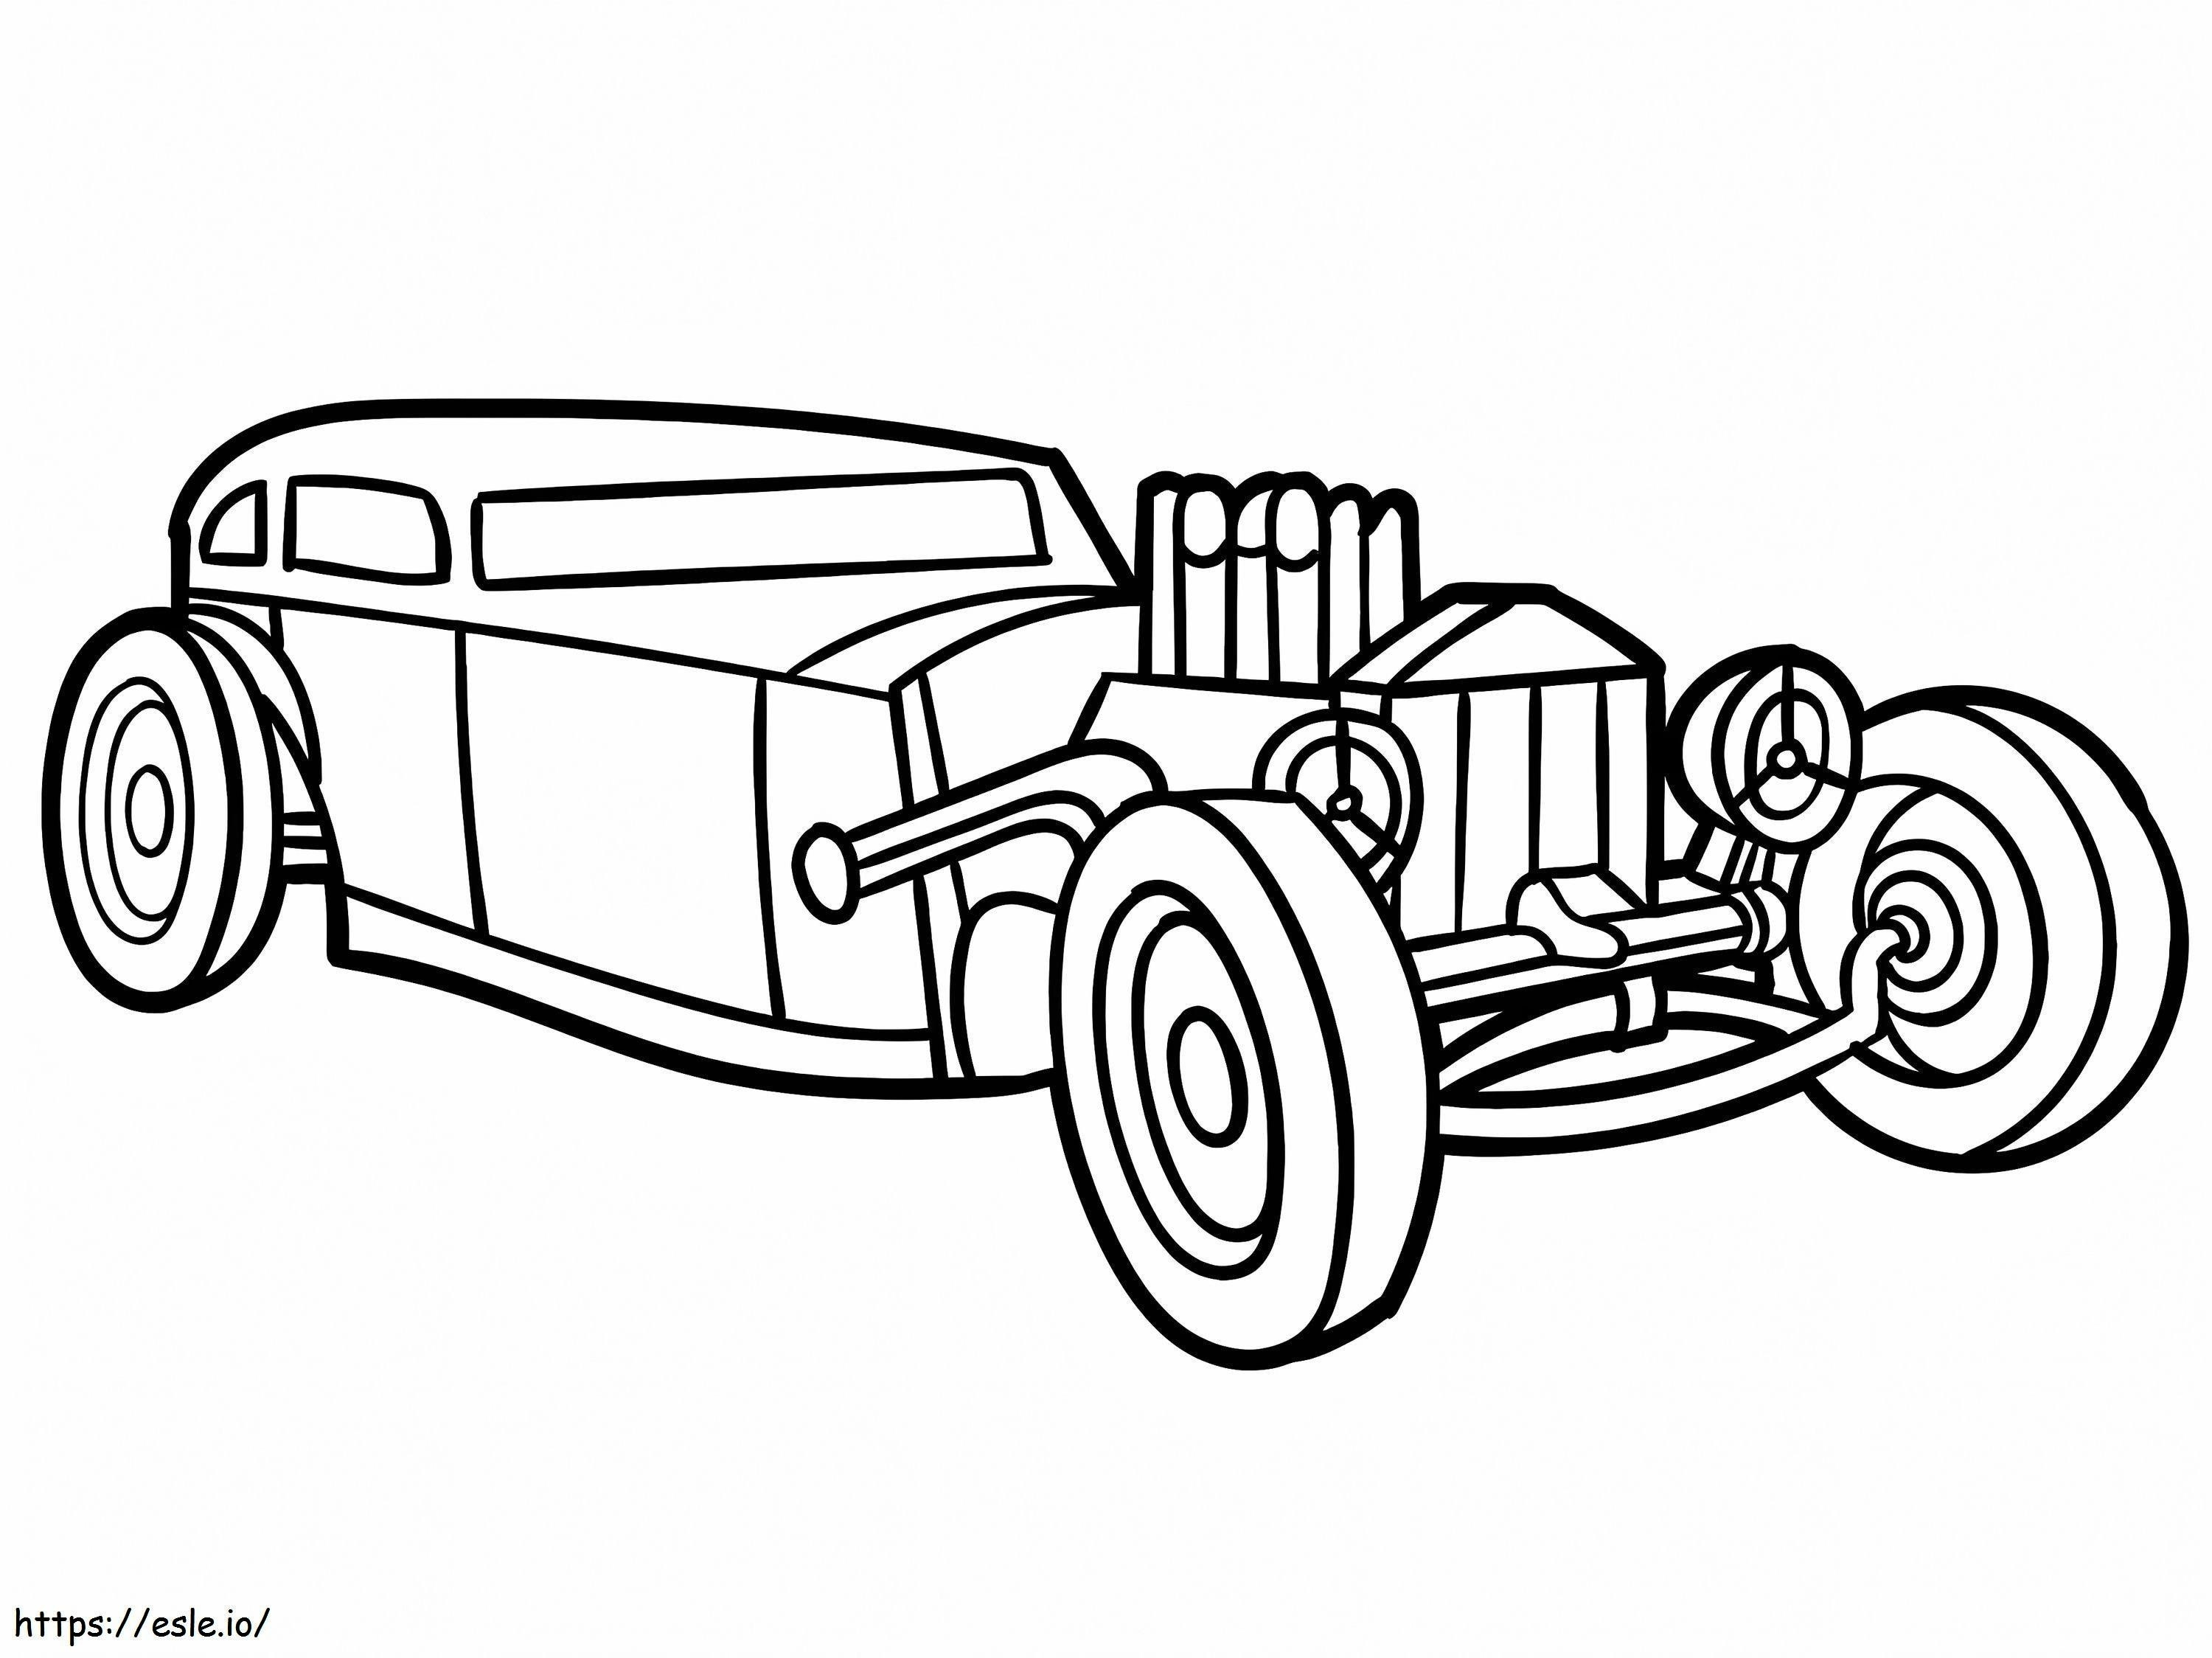 Free Hot Rod To Color coloring page